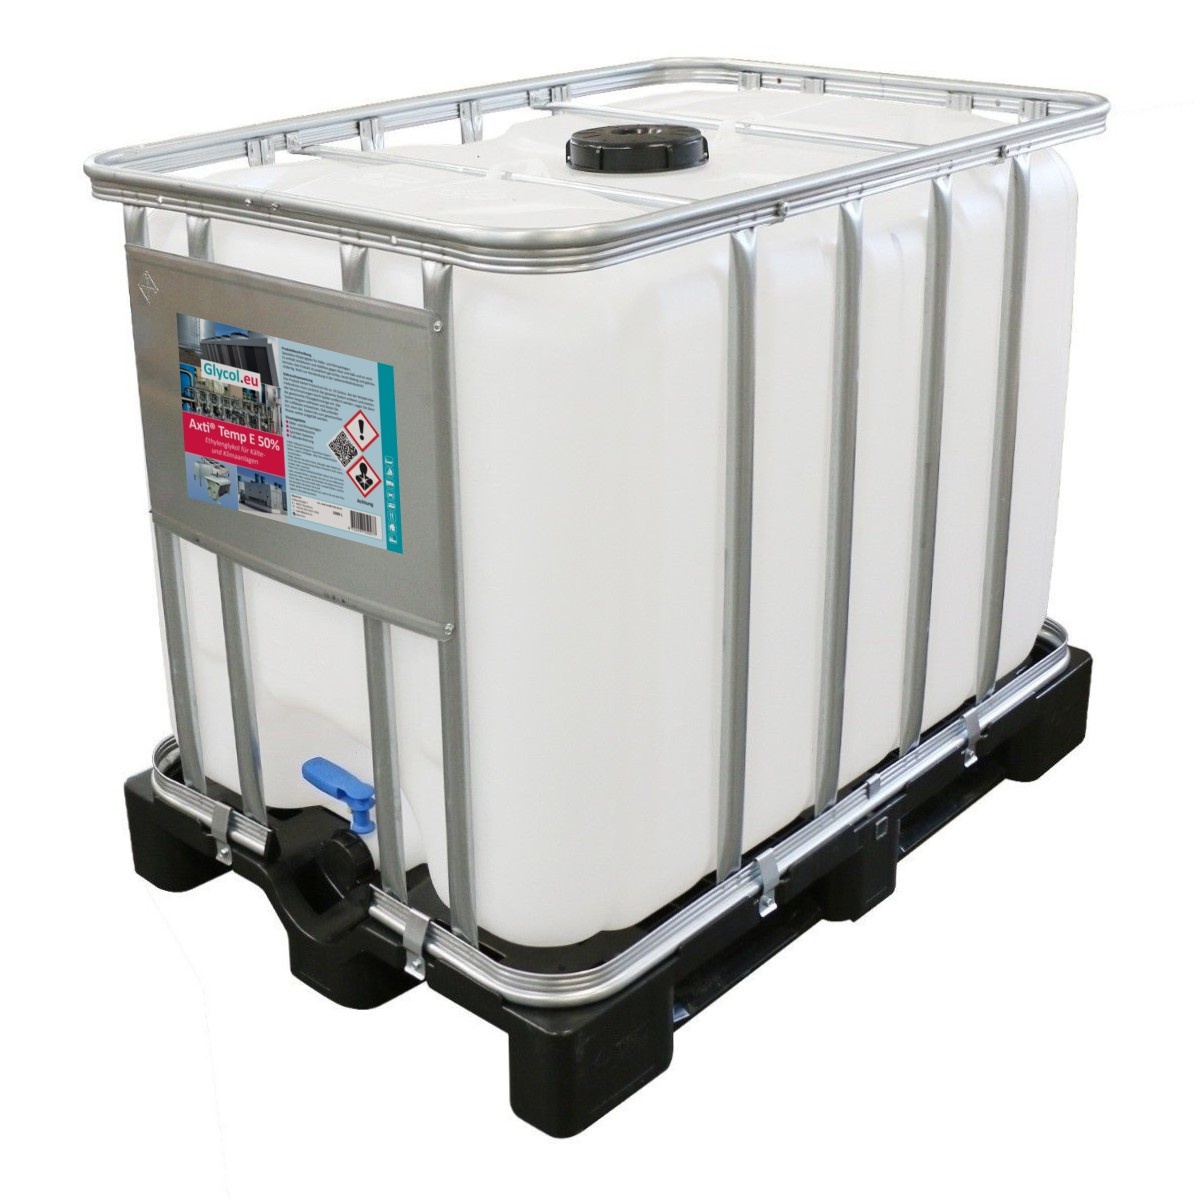 Ethylenglykol 50% Mischung - 600L IBC container